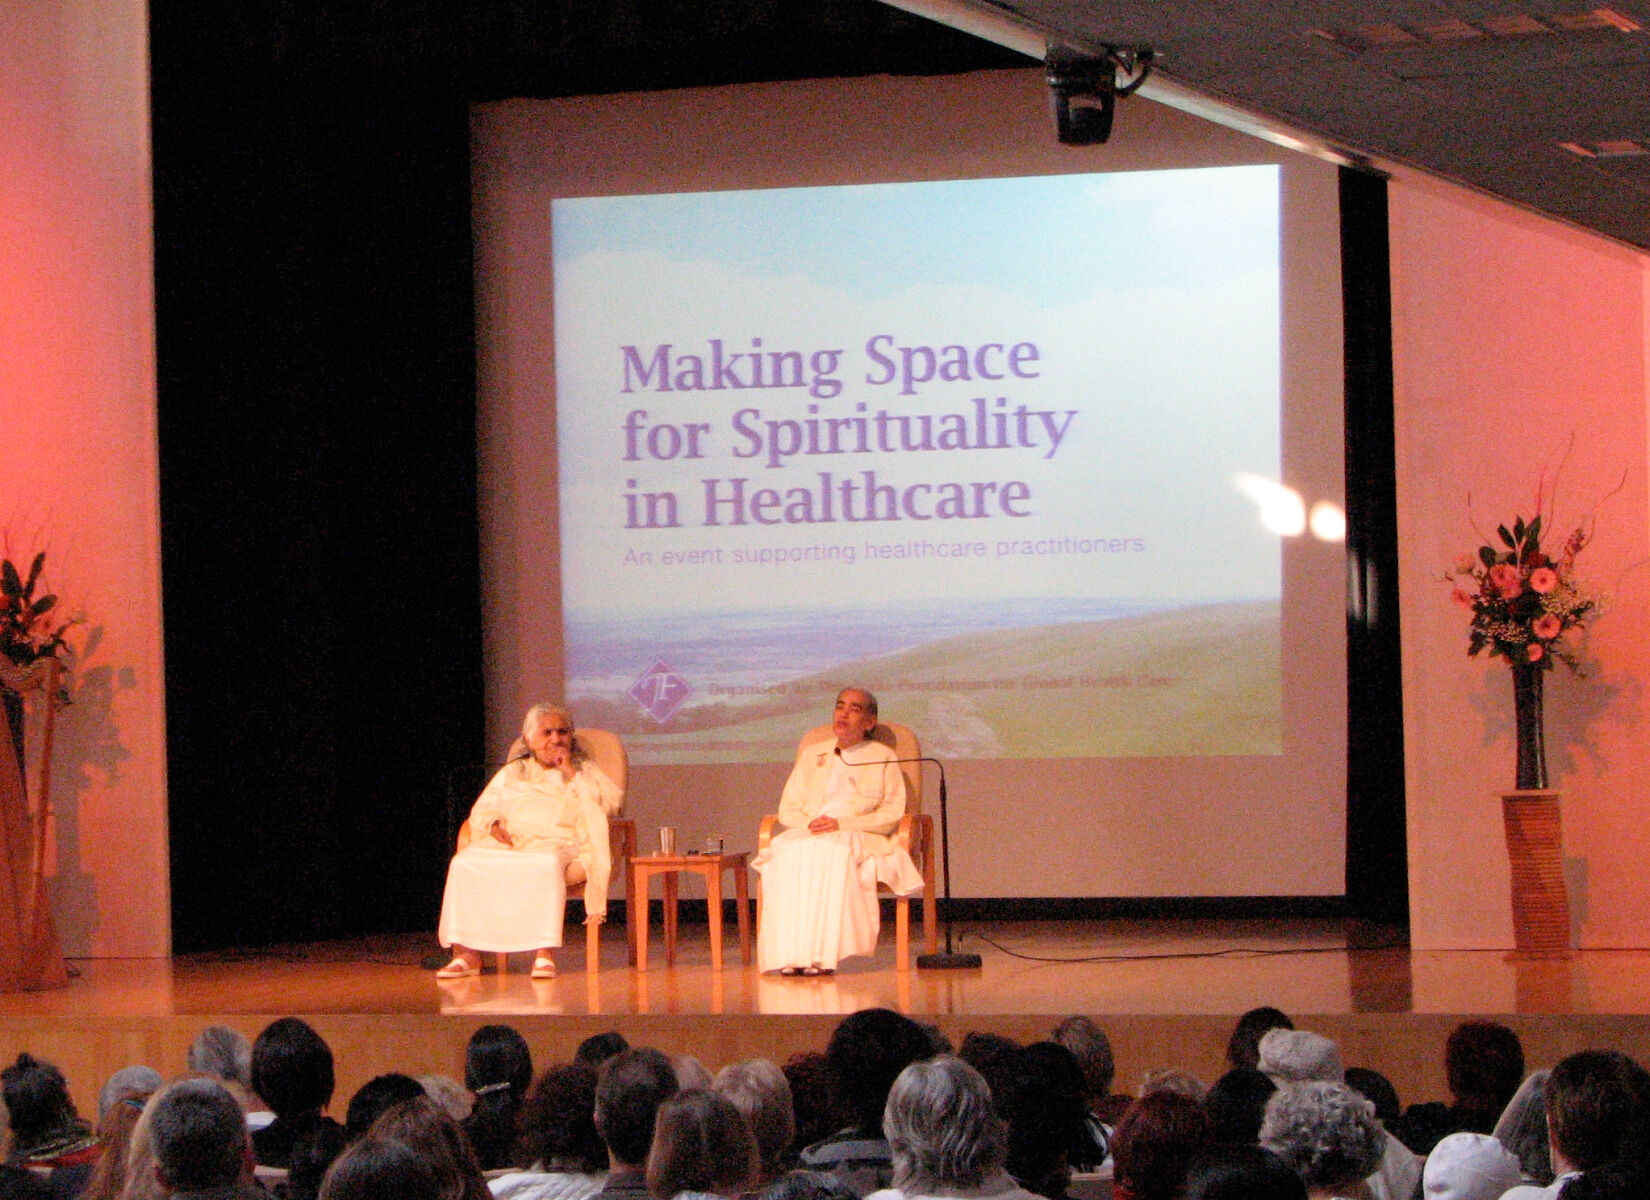 "Making Space for Spirituality in Healthcare" with Dadi Janki, London, 2009